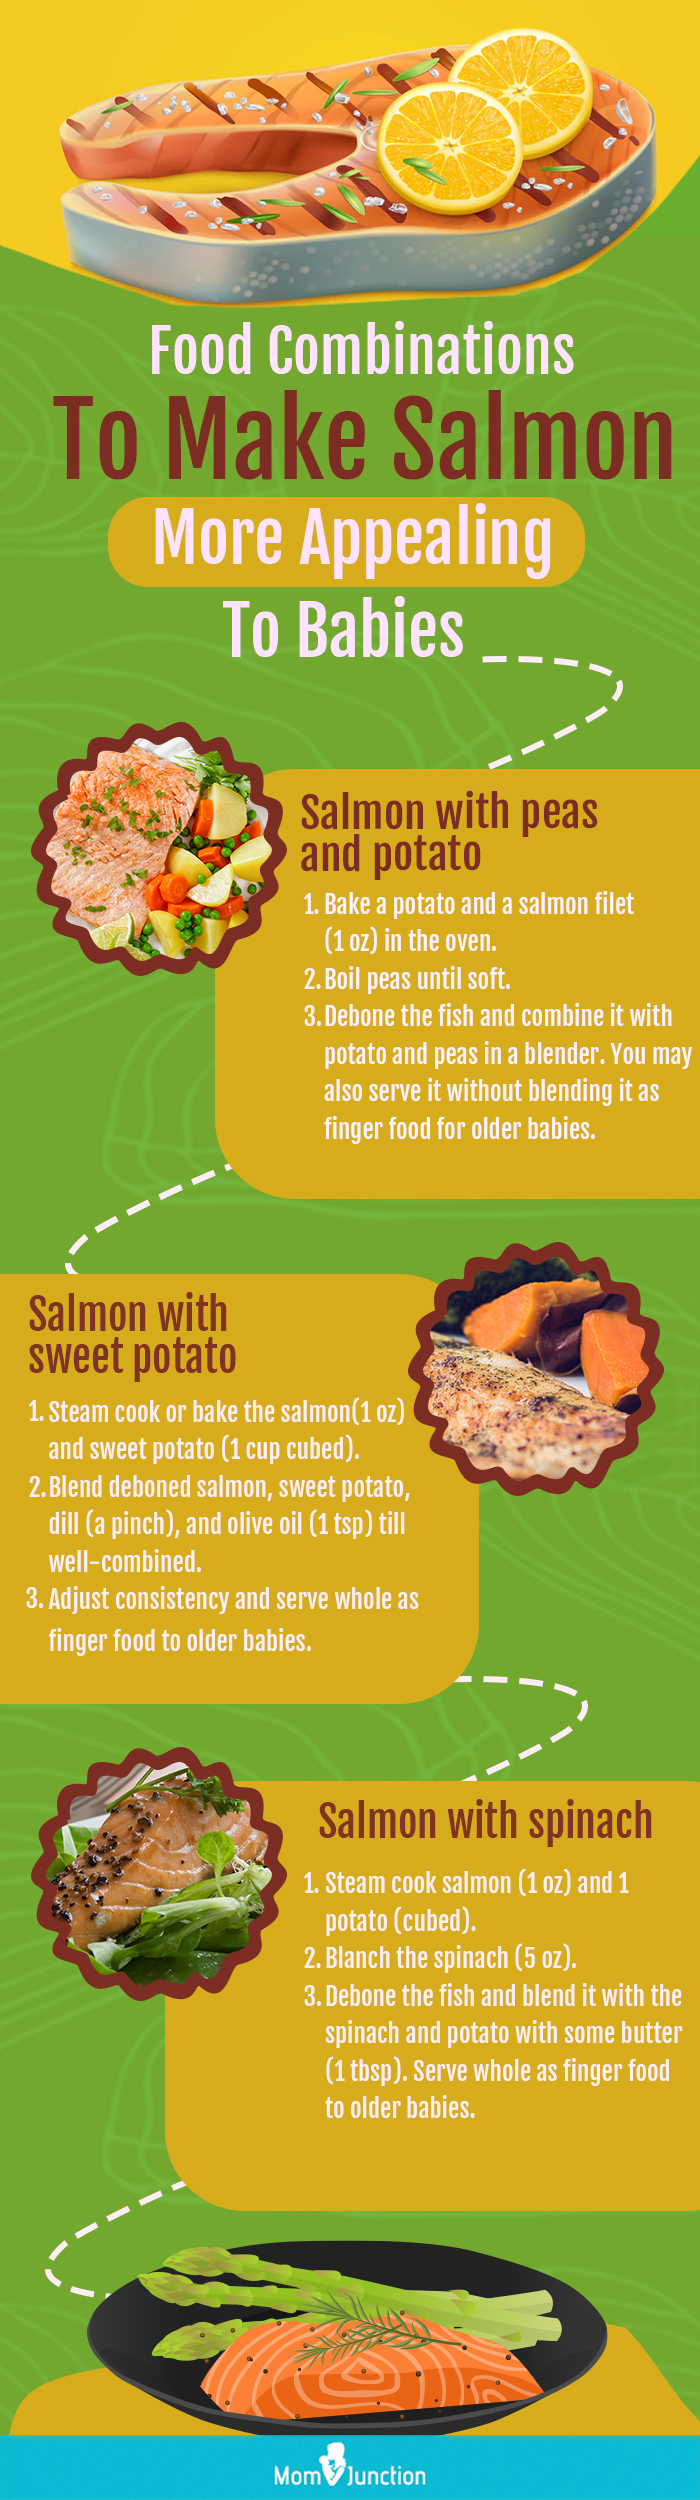 food combinations to make salmon more appealing to babies (infographic)